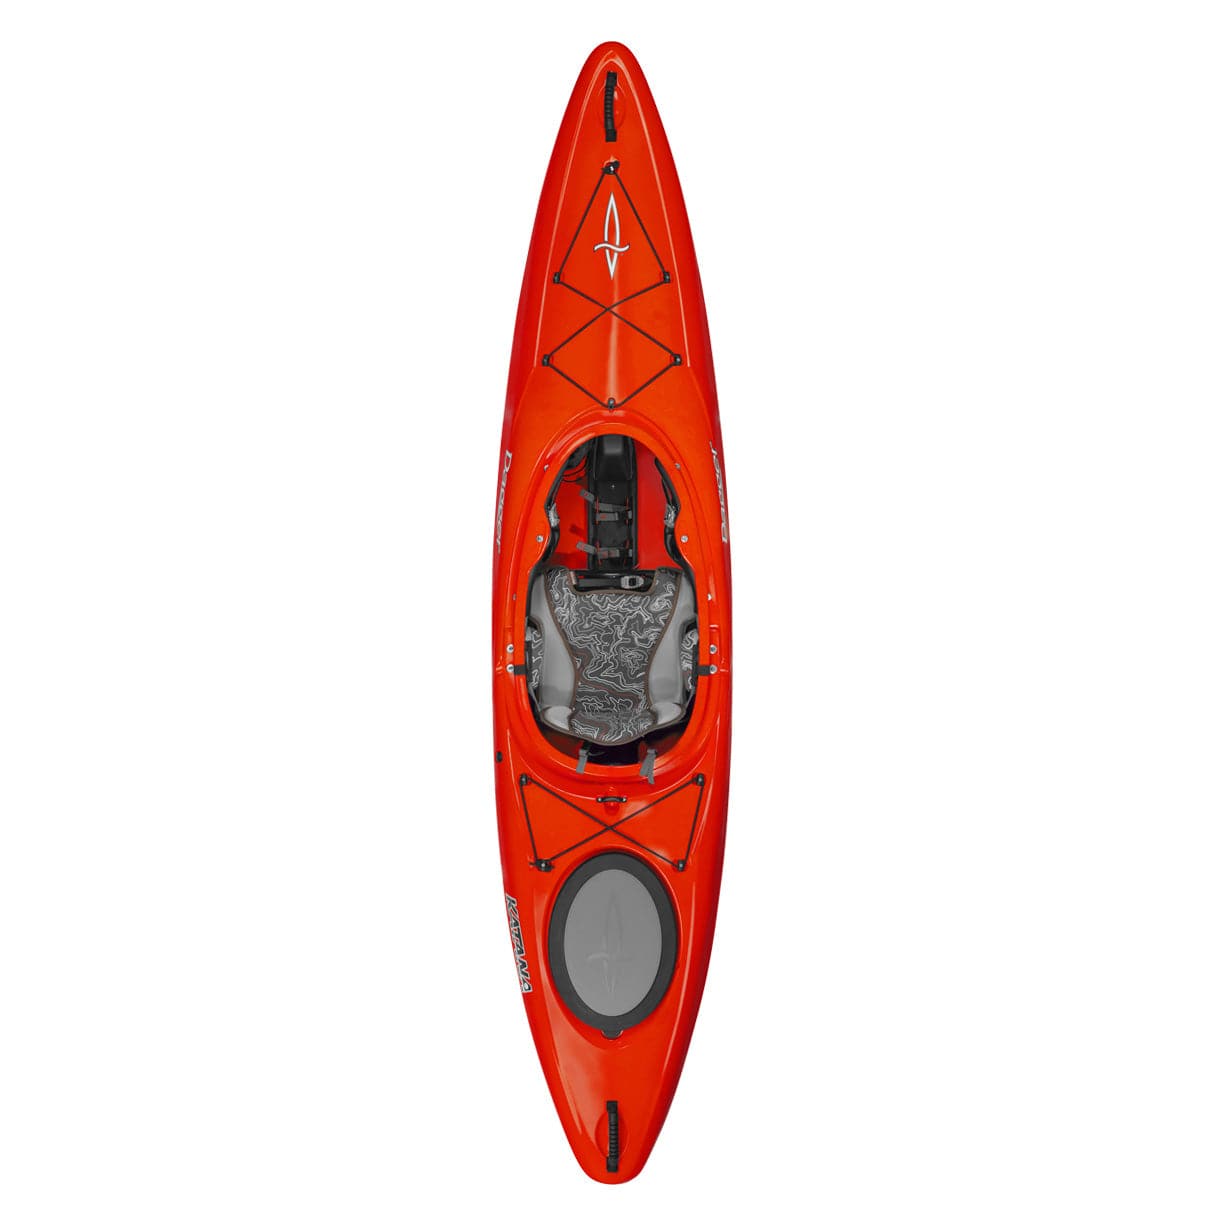 Featuring the Katana expedition / cross over kayak manufactured by Dagger shown here from a second angle.